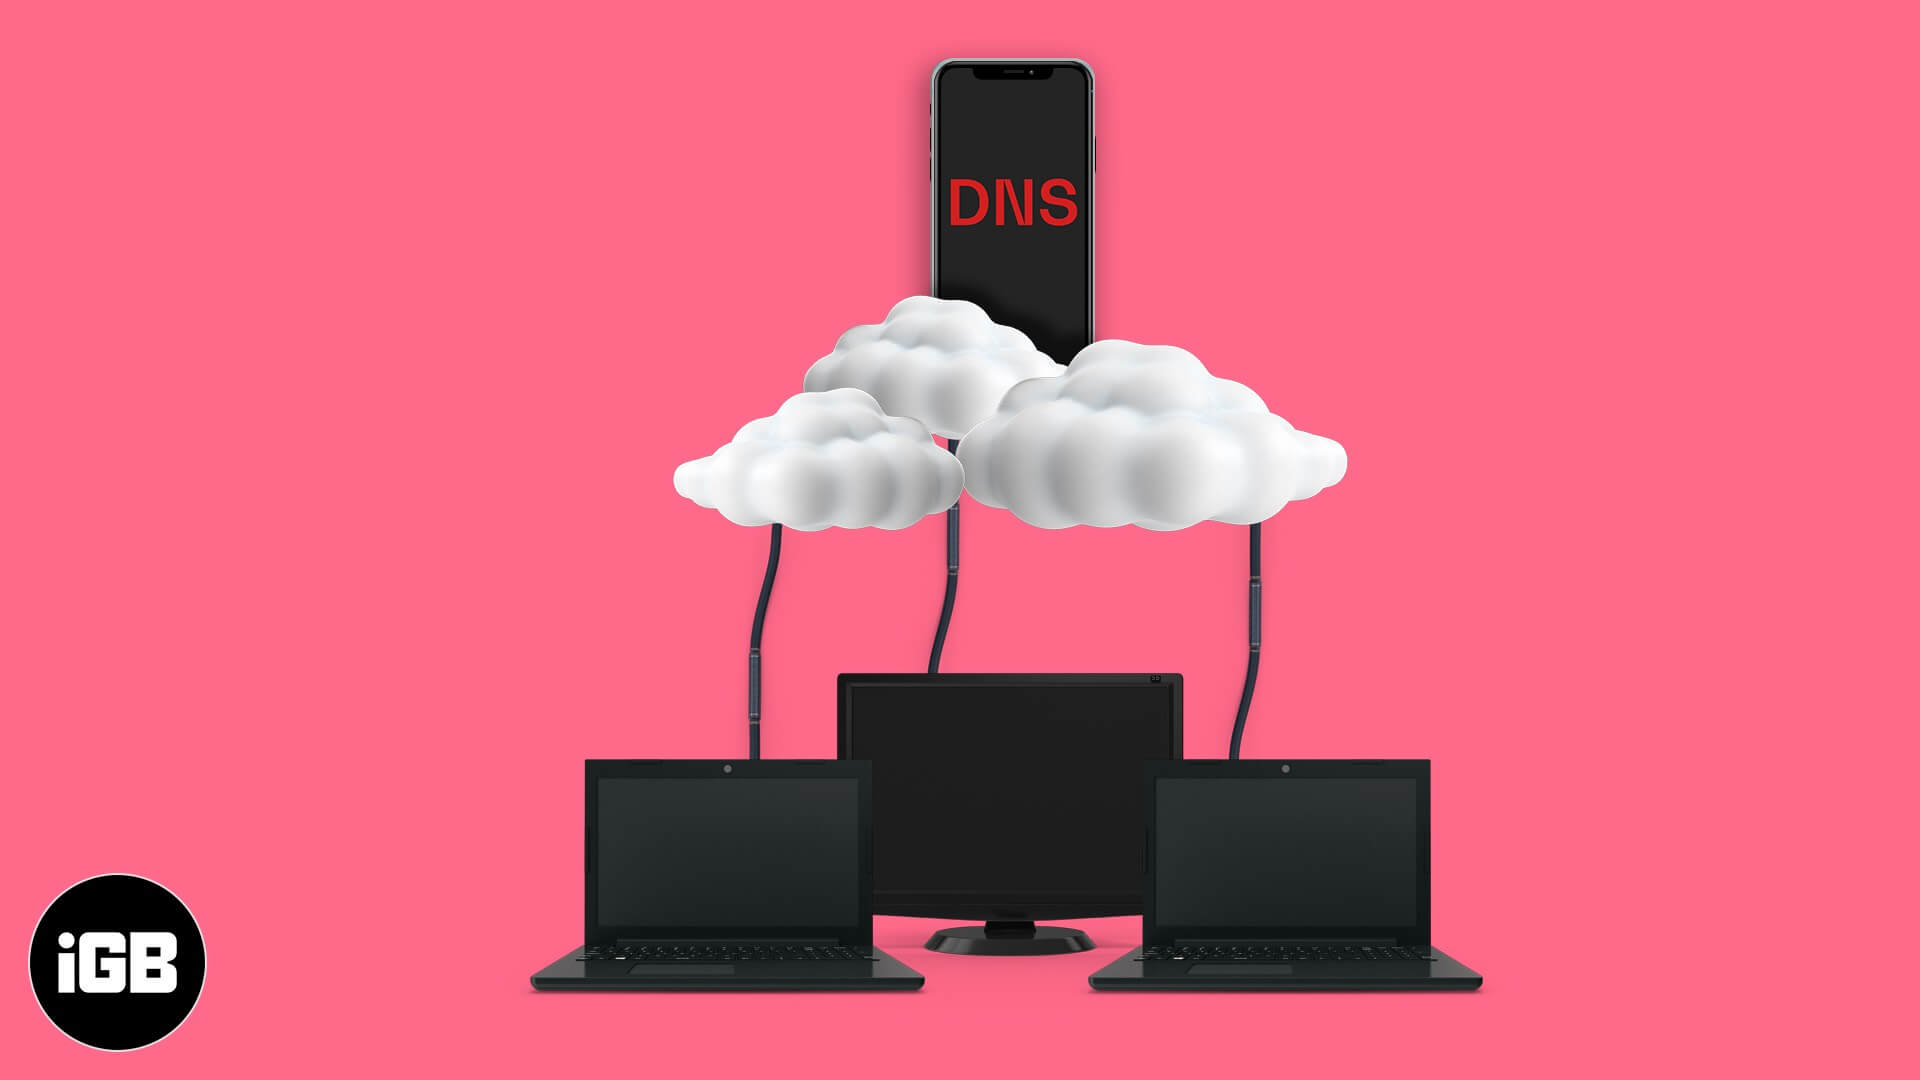 How to change dns on iphone and ipad